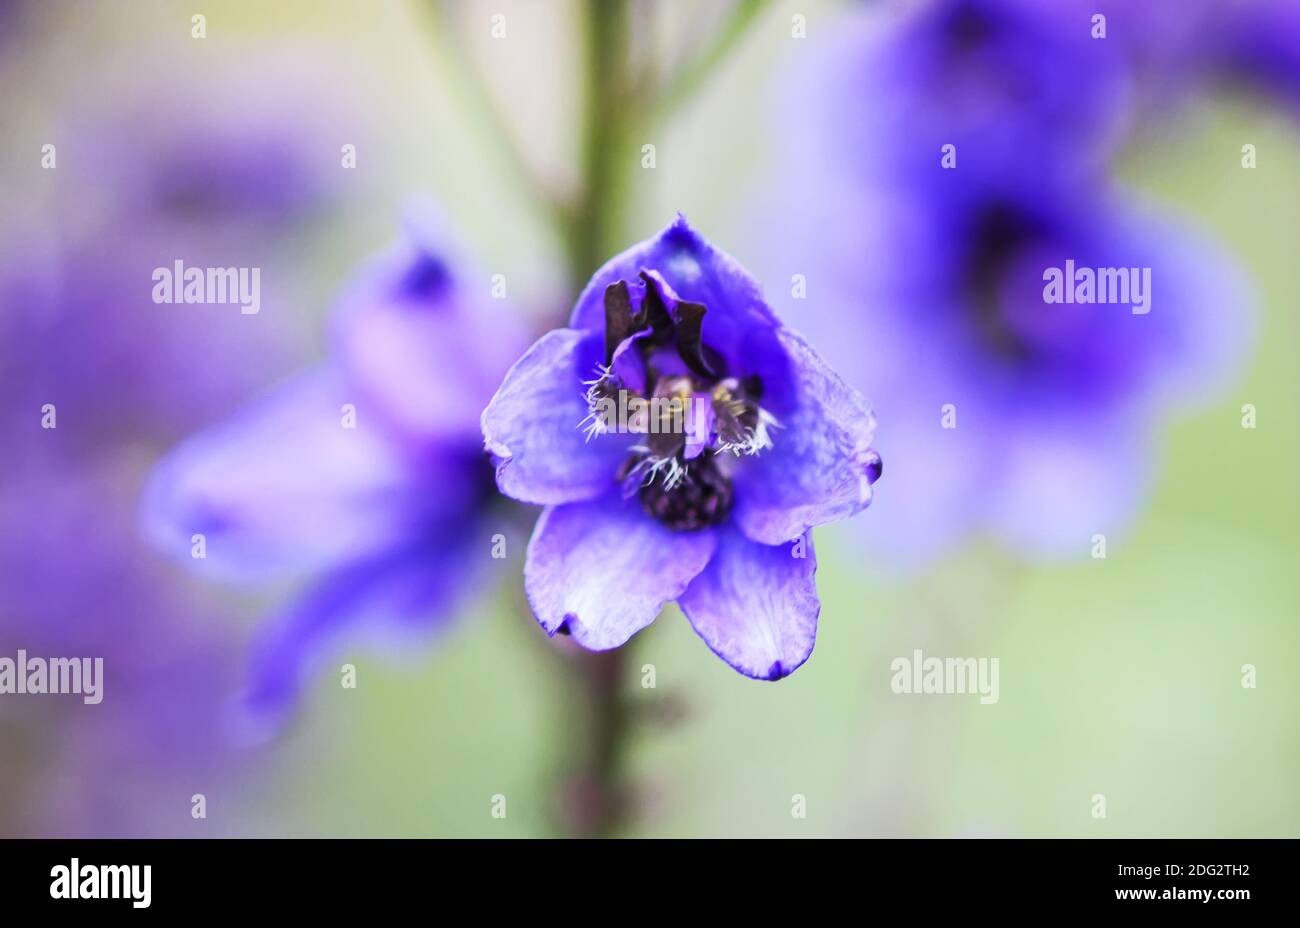 Blue delphinium beautiful flowers in summer garden. Blooming plants in the countryside. Stock Photo